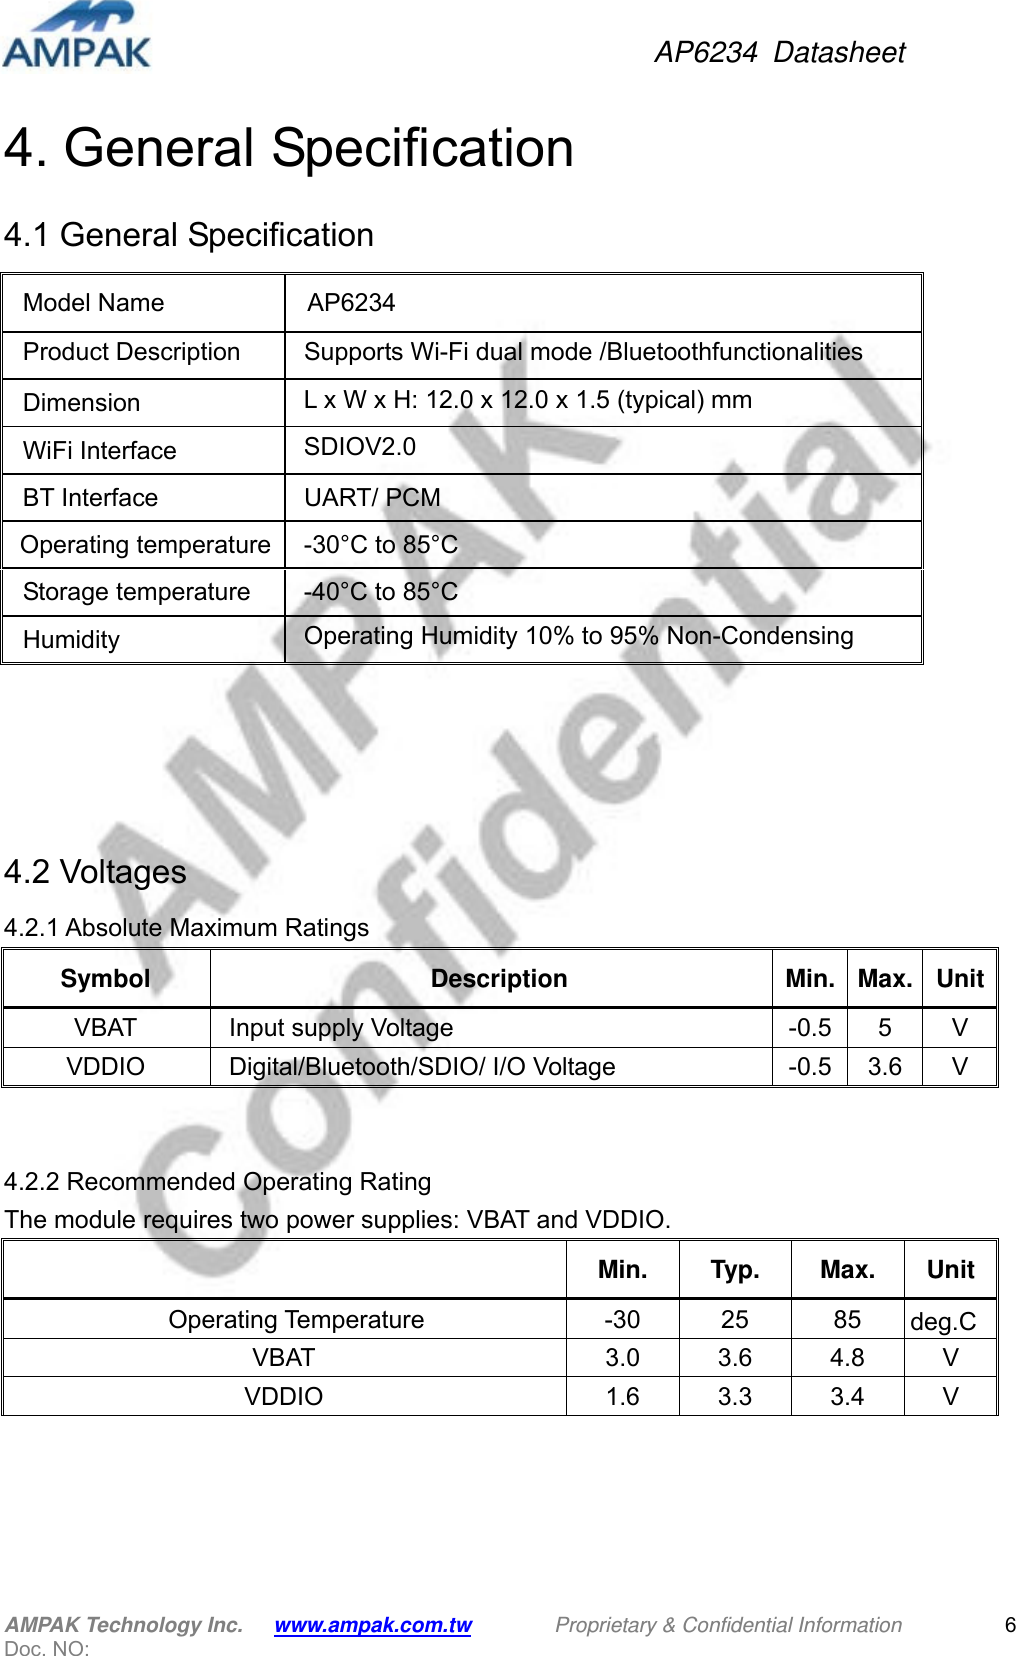 AP6234 Datasheet AMPAK Technology Inc.      www.ampak.com.tw        Proprietary &amp; Confidential Information       Doc. NO:   64. General Specification 4.1 General Specification                4.2 Voltages 4.2.1 Absolute Maximum Ratings Symbol Description Min. Max. UnitVBAT  Input supply Voltage  -0.5  5  V VDDIO Digital/Bluetooth/SDIO/ I/O Voltage  -0.5  3.6  V   4.2.2 Recommended Operating Rating     The module requires two power supplies: VBAT and VDDIO.  Min. Typ. Max. Unit   Operating Temperature  -30  25  85  deg.CVBAT  3.0 3.6 4.8 V VDDIO  1.6 3.3 3.4 V  Model Name  AP6234 Product Description    Supports Wi-Fi dual mode /Bluetoothfunctionalities Dimension  L x W x H: 12.0 x 12.0 x 1.5 (typical) mm  WiFi Interface  SDIOV2.0 BT Interface  UART/ PCM Operating temperature  -30°C to 85°C Storage temperature  -40°C to 85°C Humidity  Operating Humidity 10% to 95% Non-Condensing 